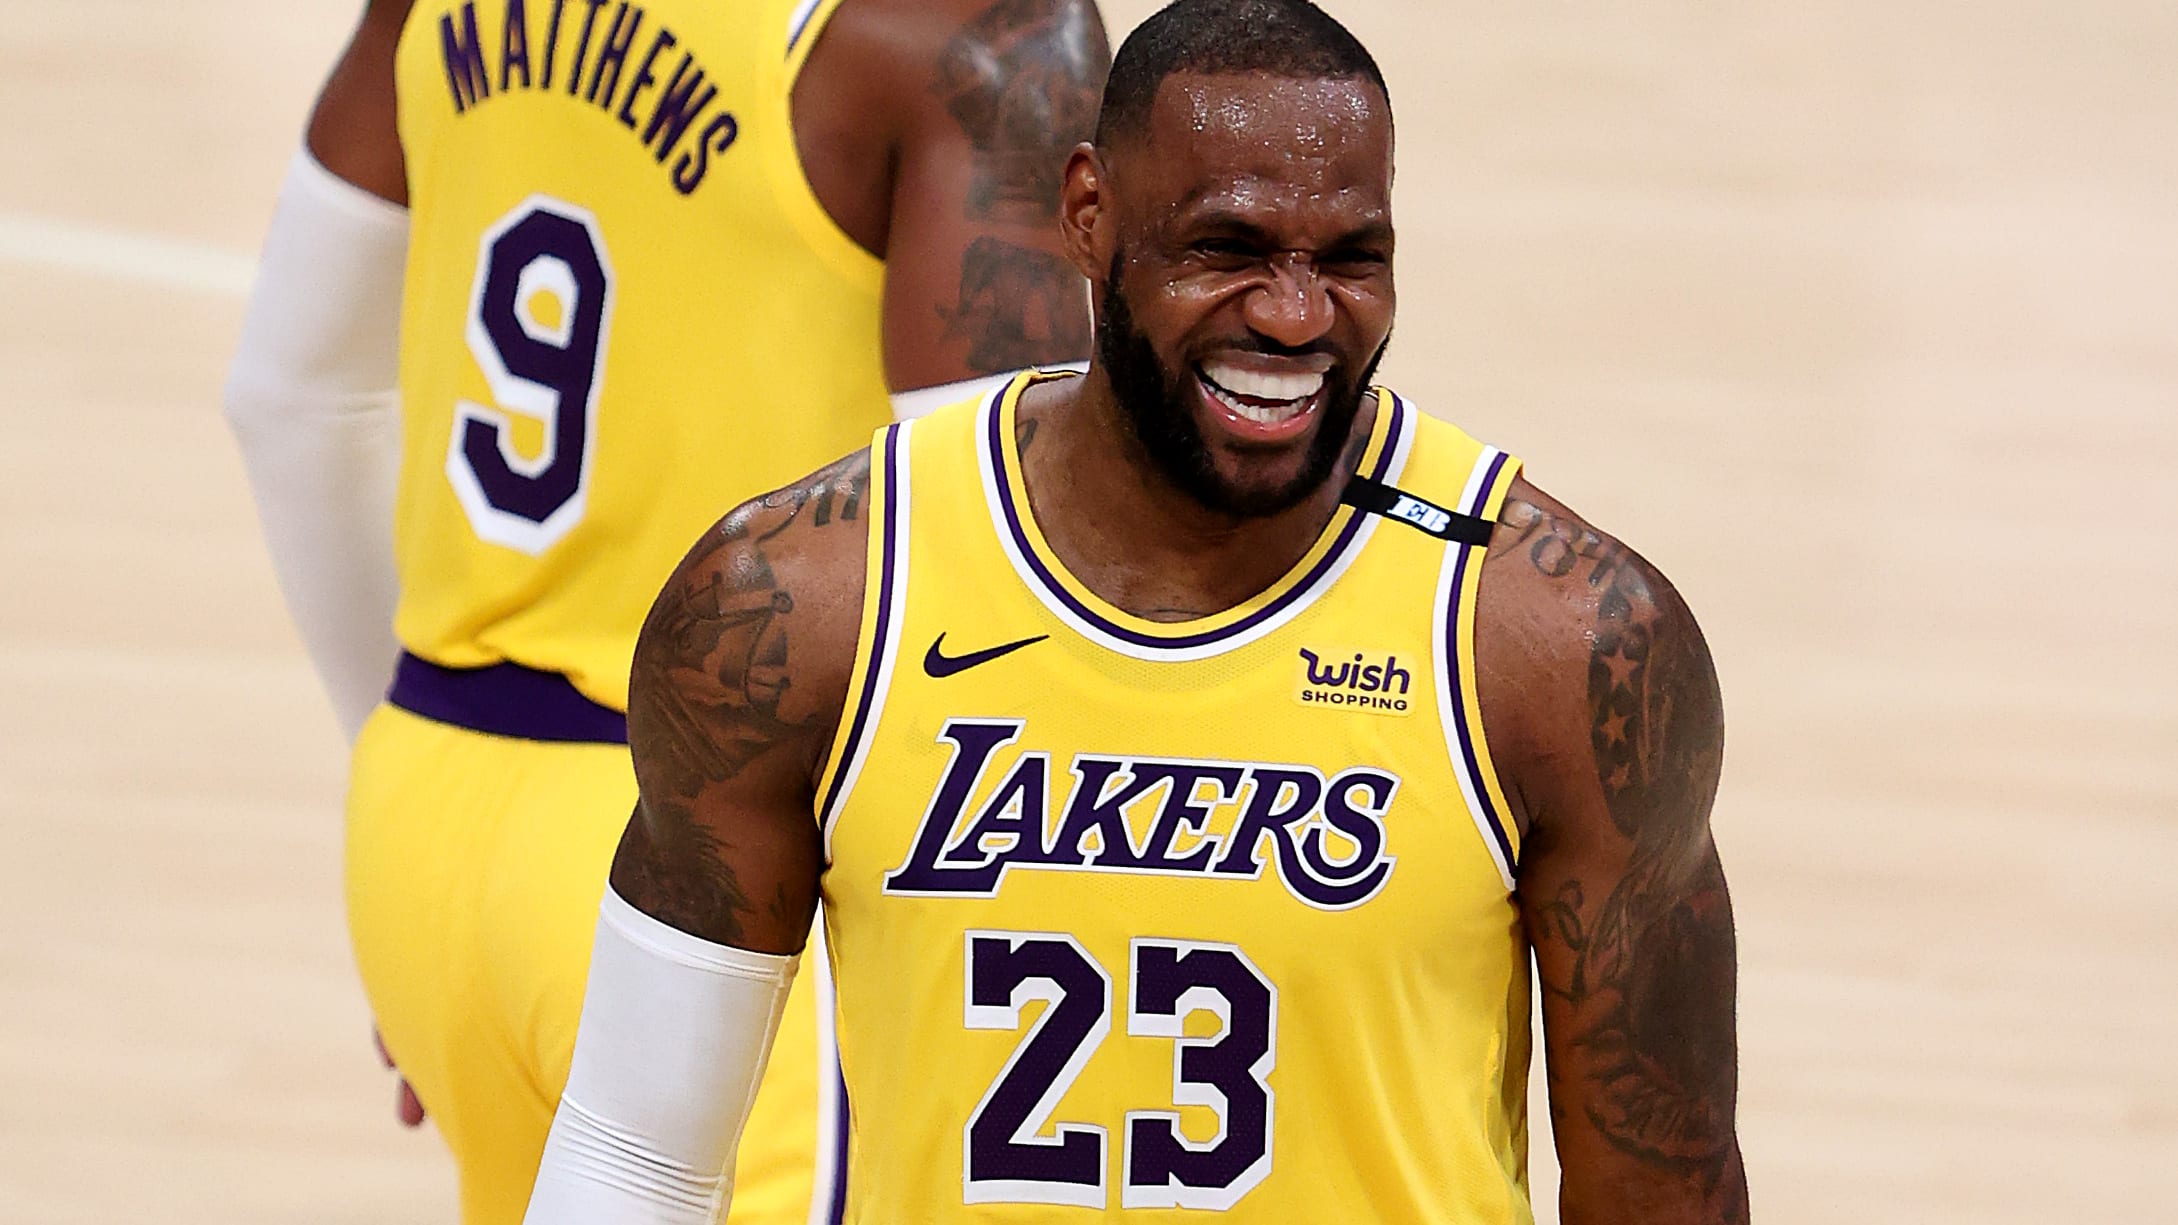 Report: LeBron changing to No. 6 jersey from No. 23 next season